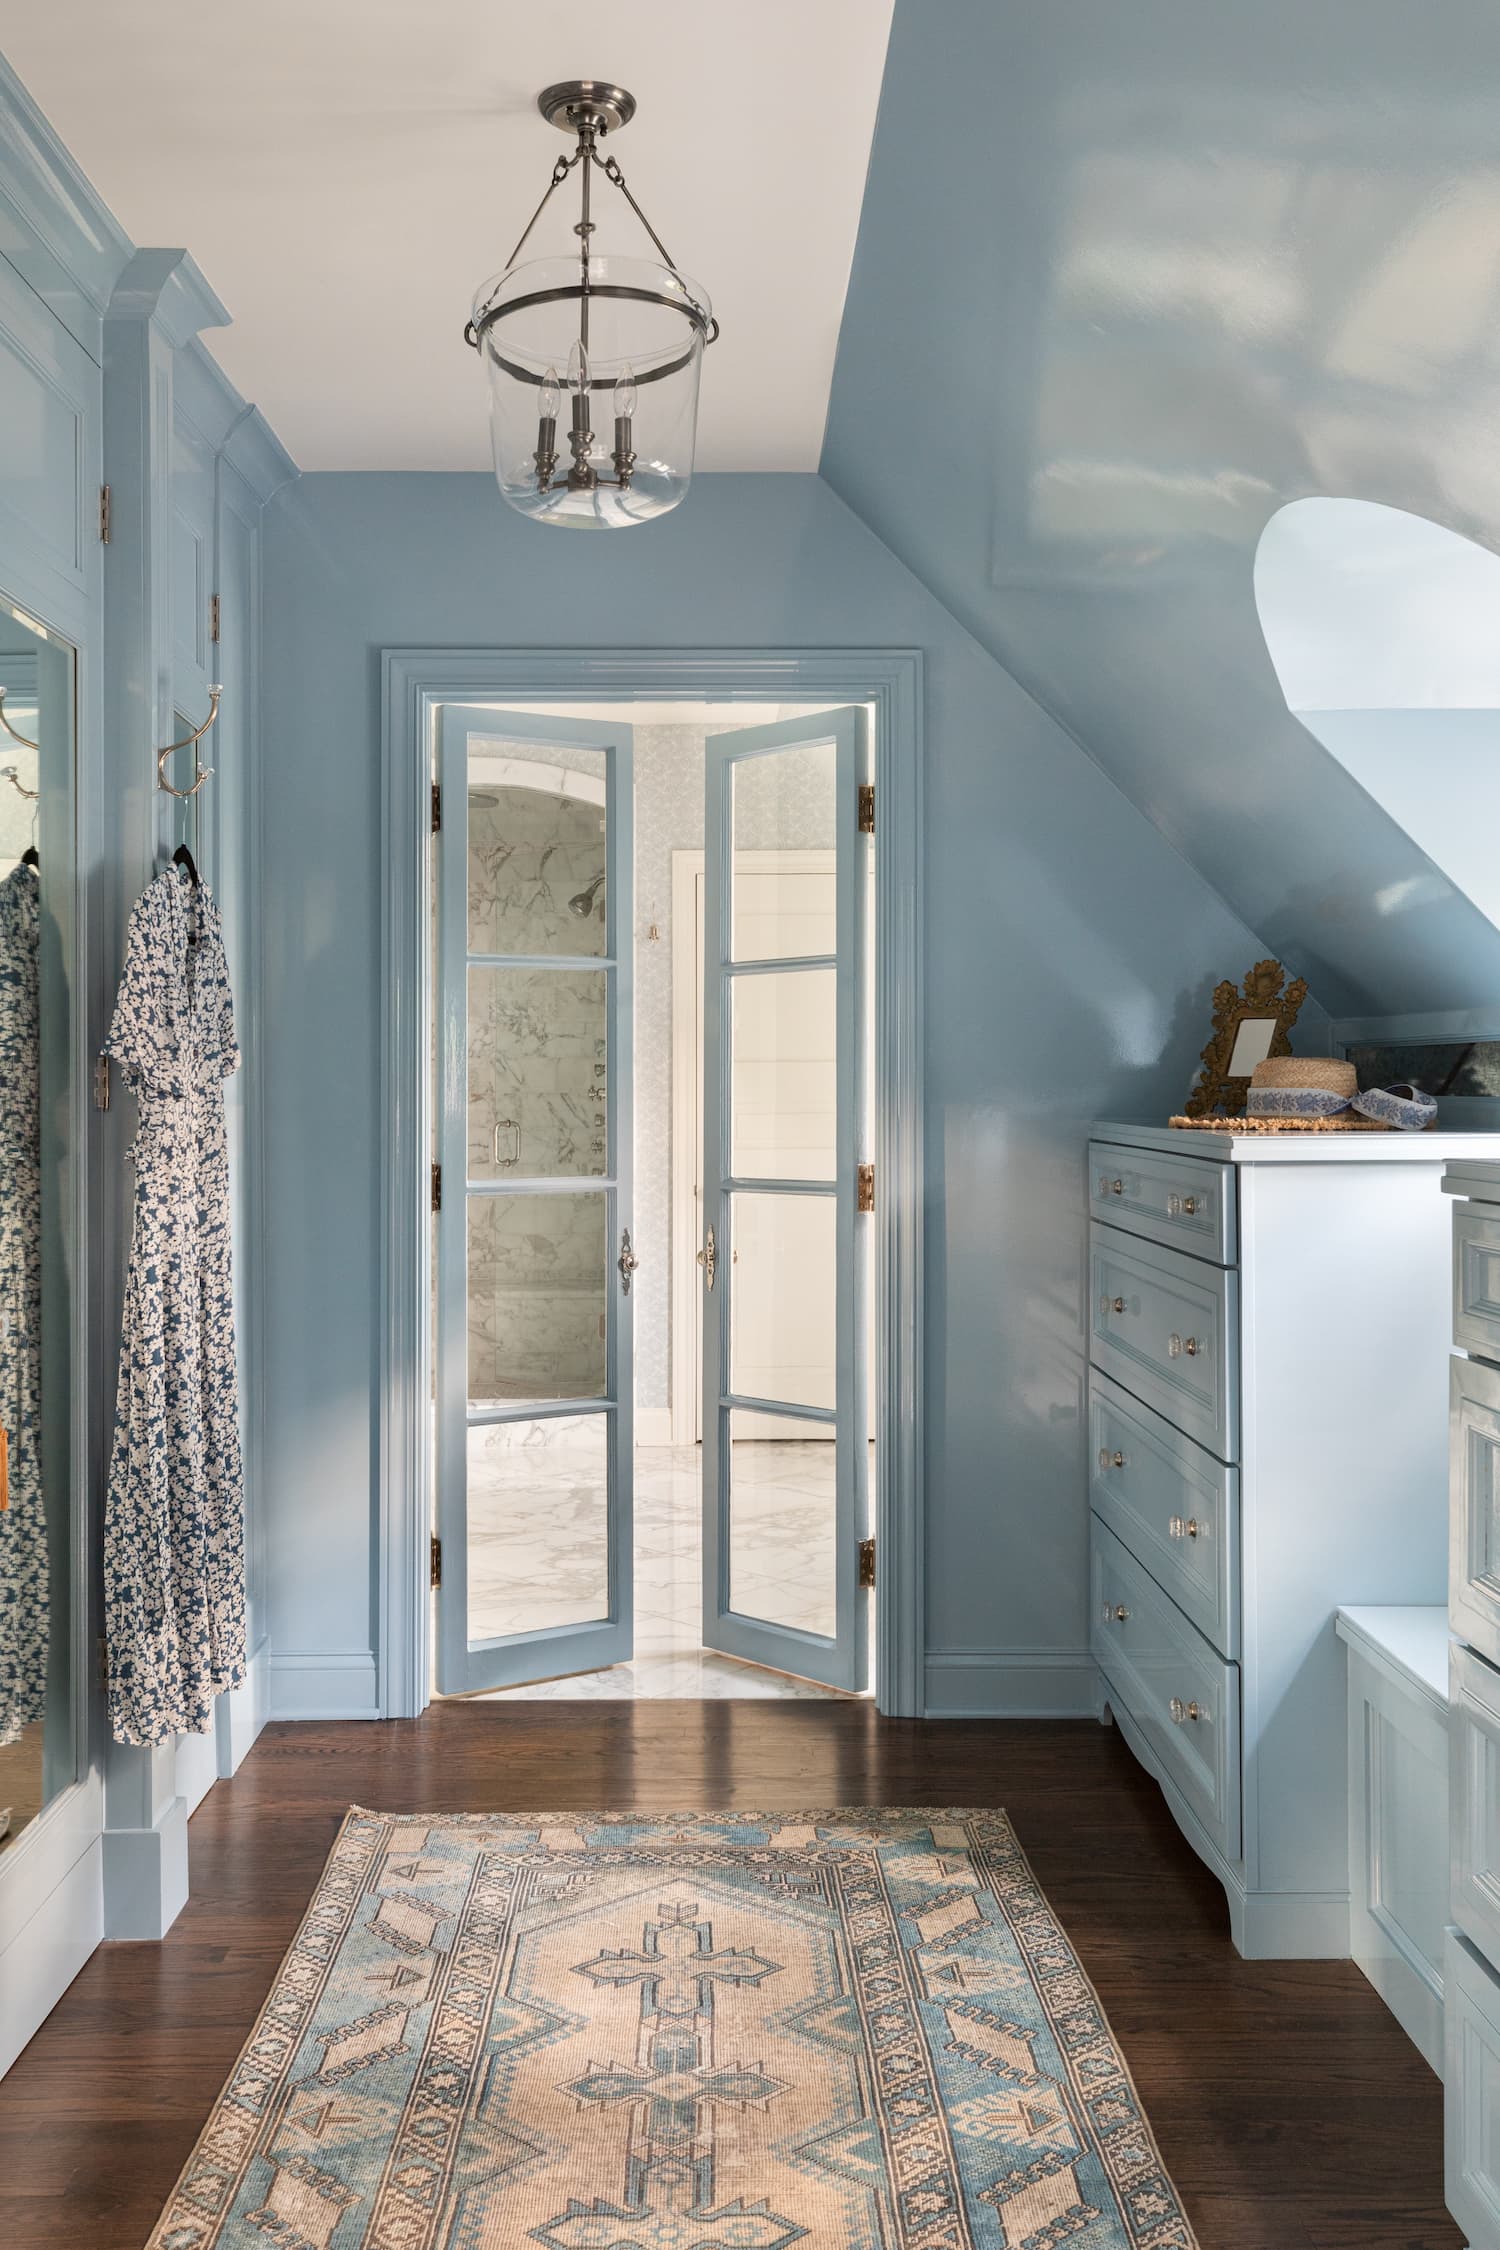 Fresh young design with traditional style walk-in closet in light blue by Alexandra Kaehler.